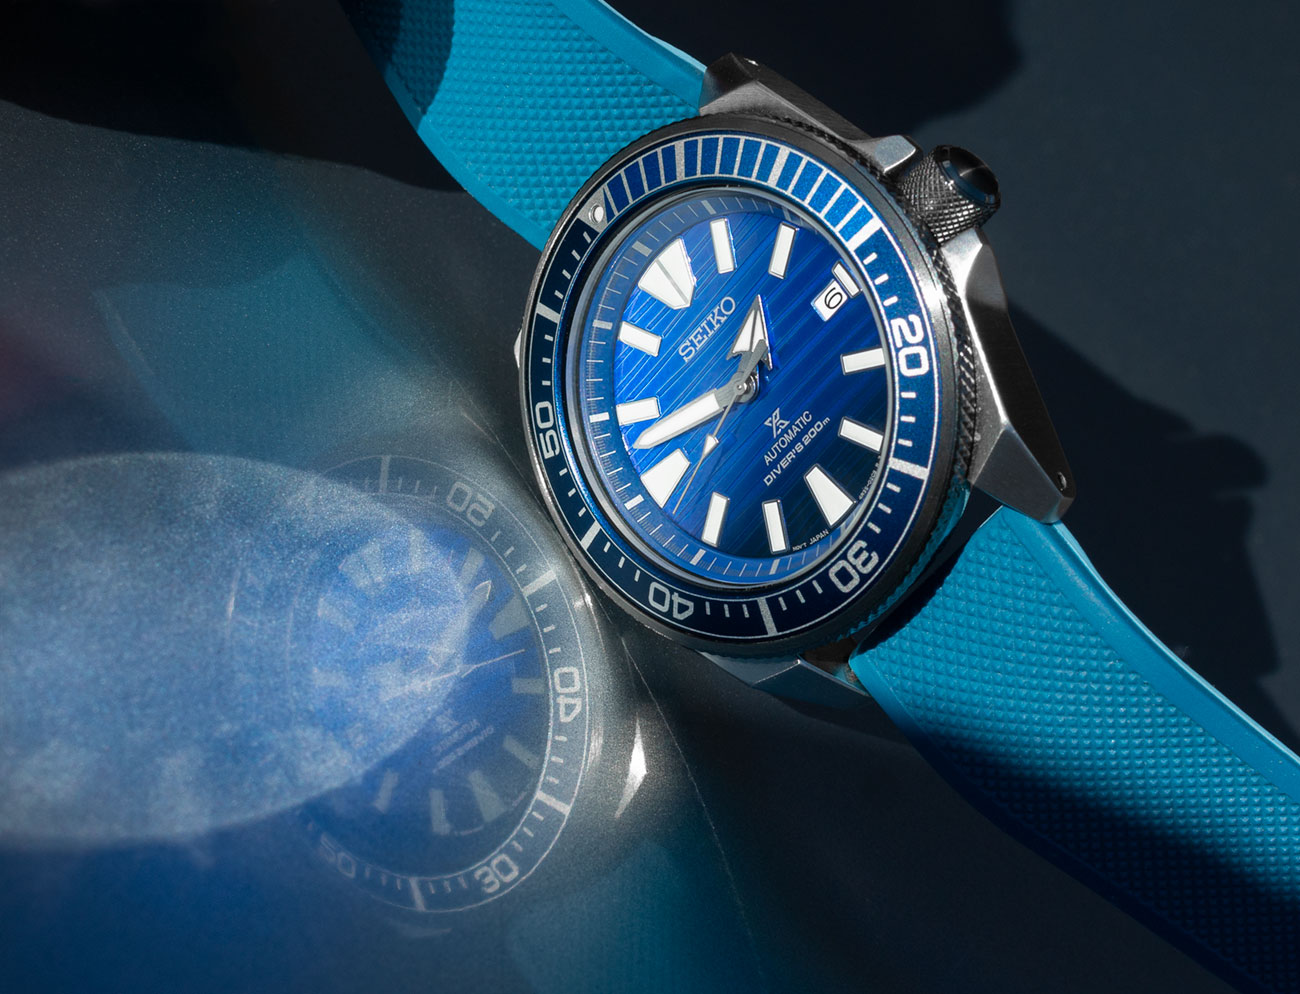 Seiko Prospex SRPC93 'Save The Ocean' Samurai Dive Watch Review | Page 2 of  2 | aBlogtoWatch